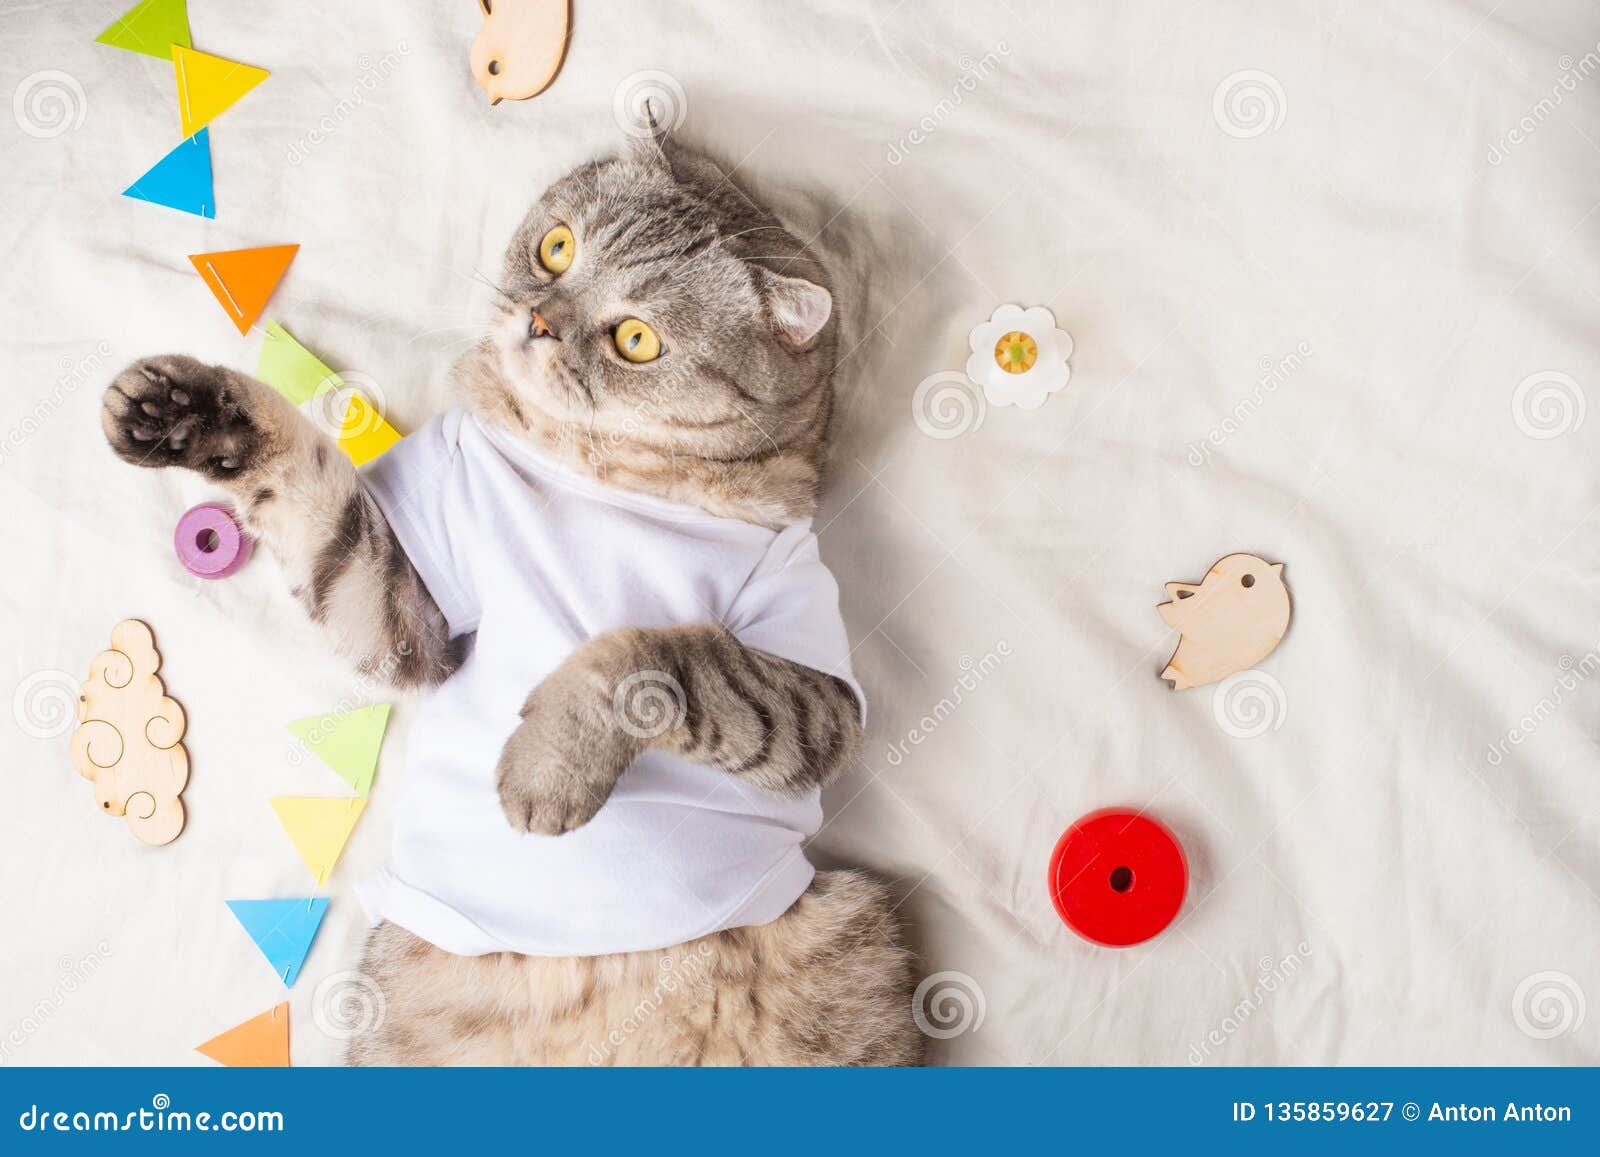 Very Cute Baby Cat, with Toys and a Pacifier. in a White T-shirt ...